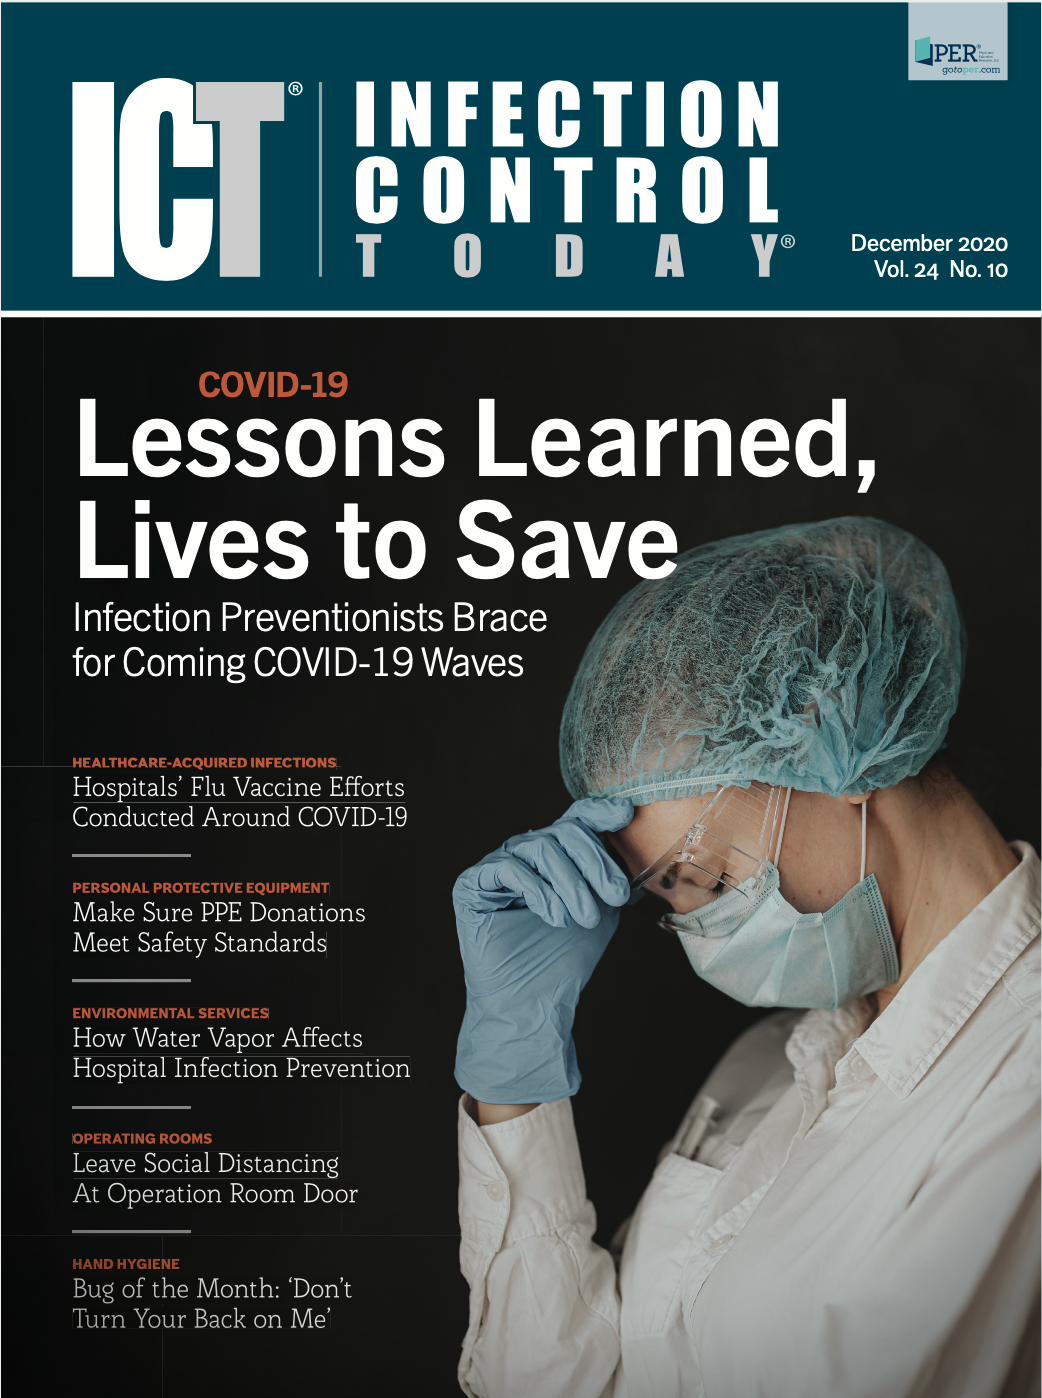 Infection Control Today, December 2020 (Vol. 24 No. 10)